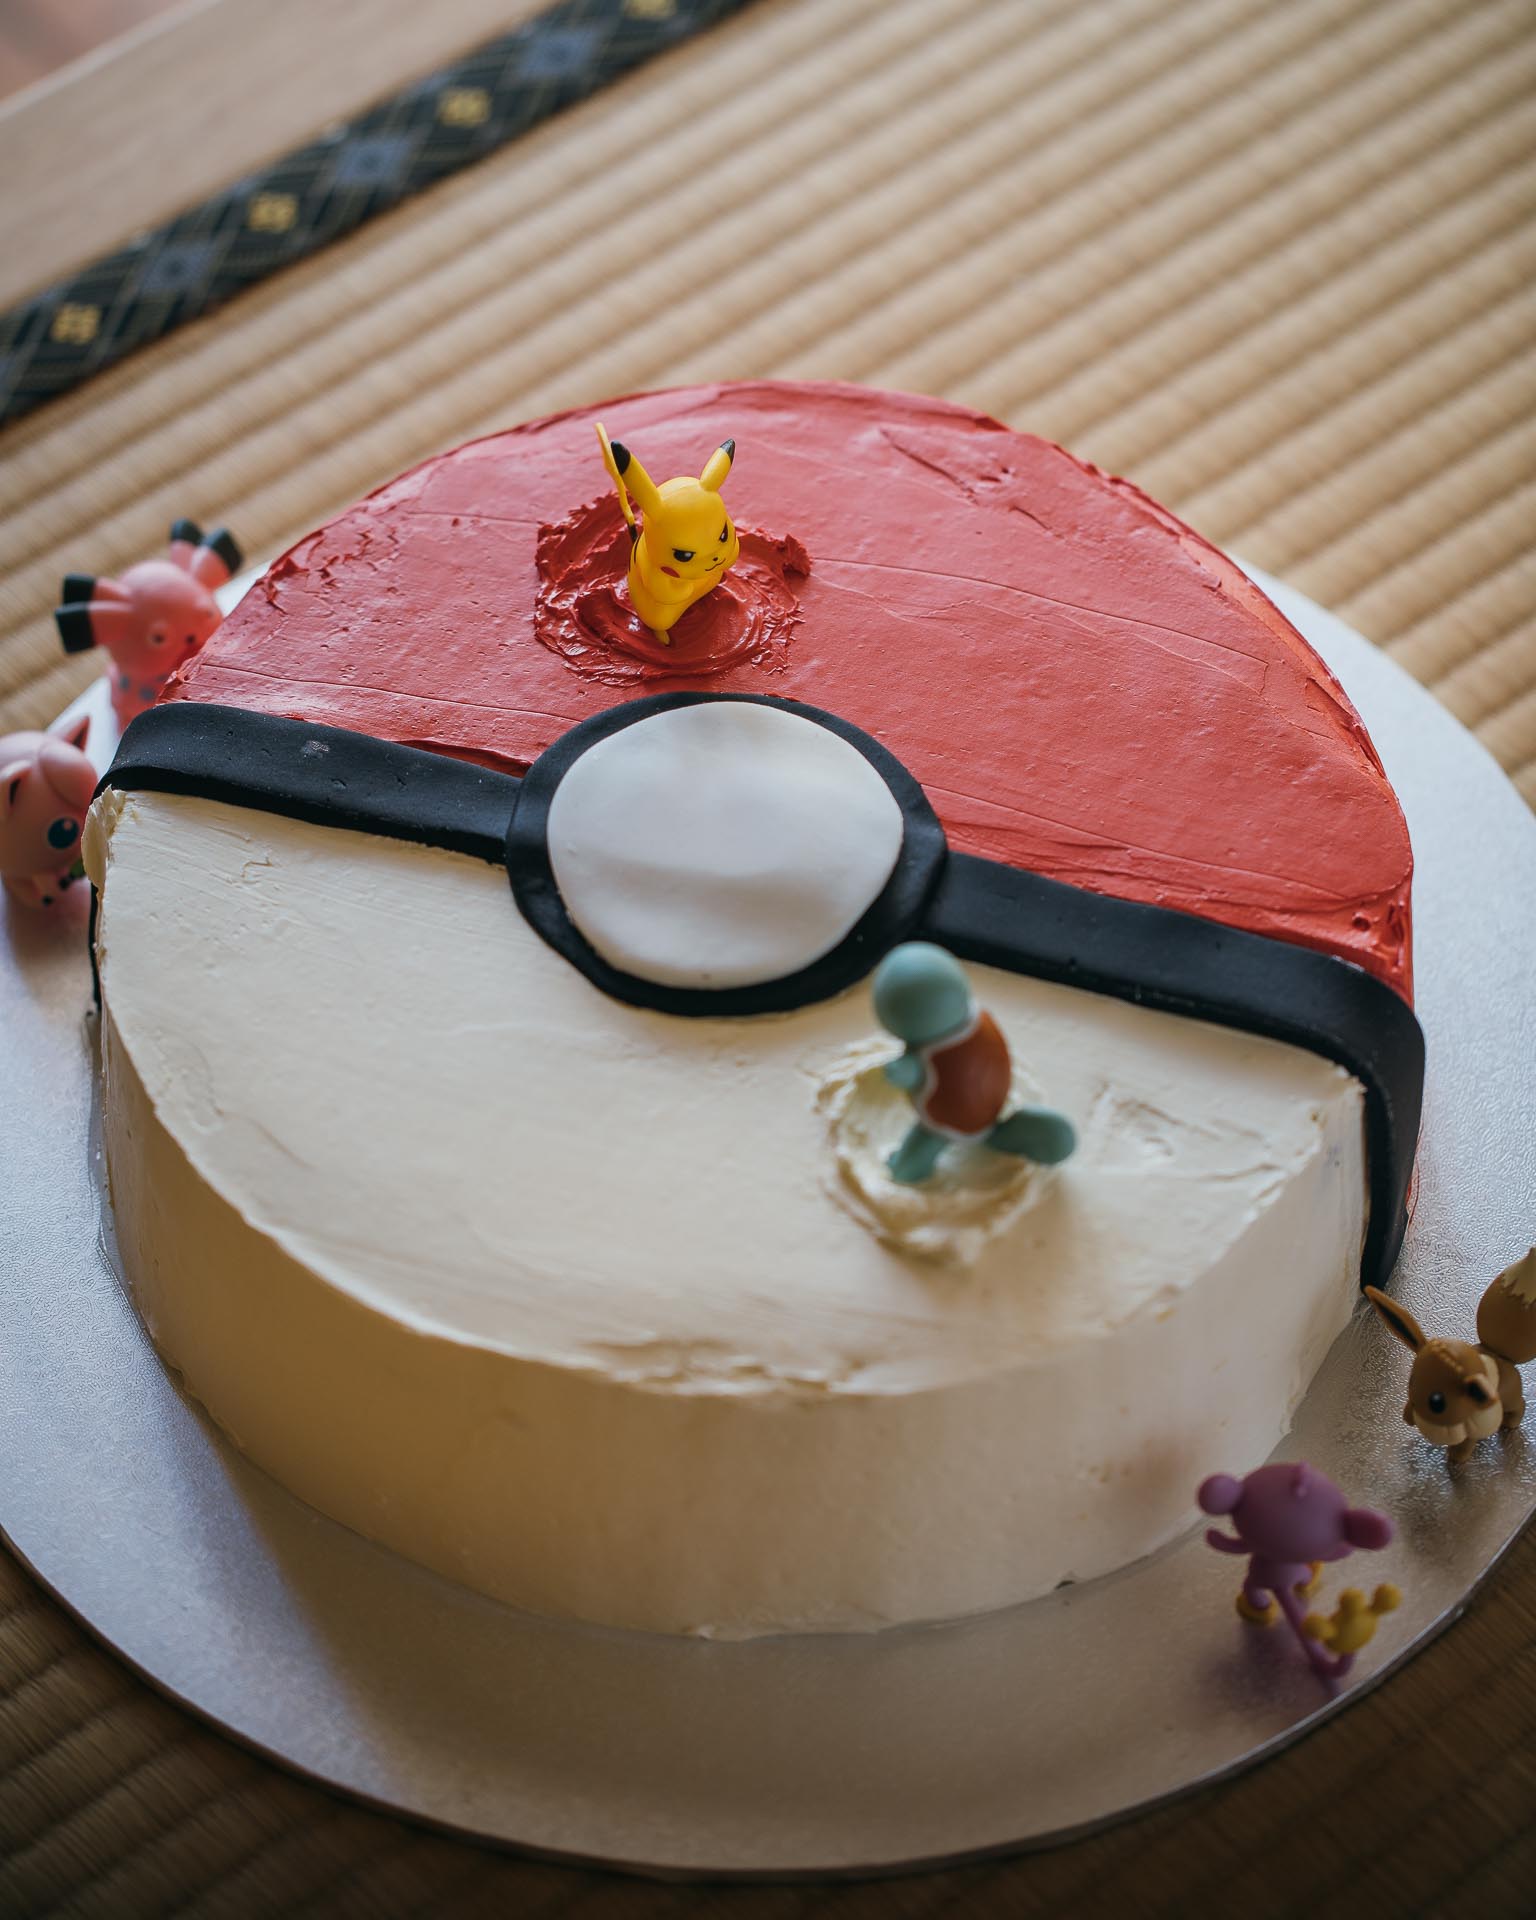 Pokeball Cake Recipe (For A Pokemon Themed Party)